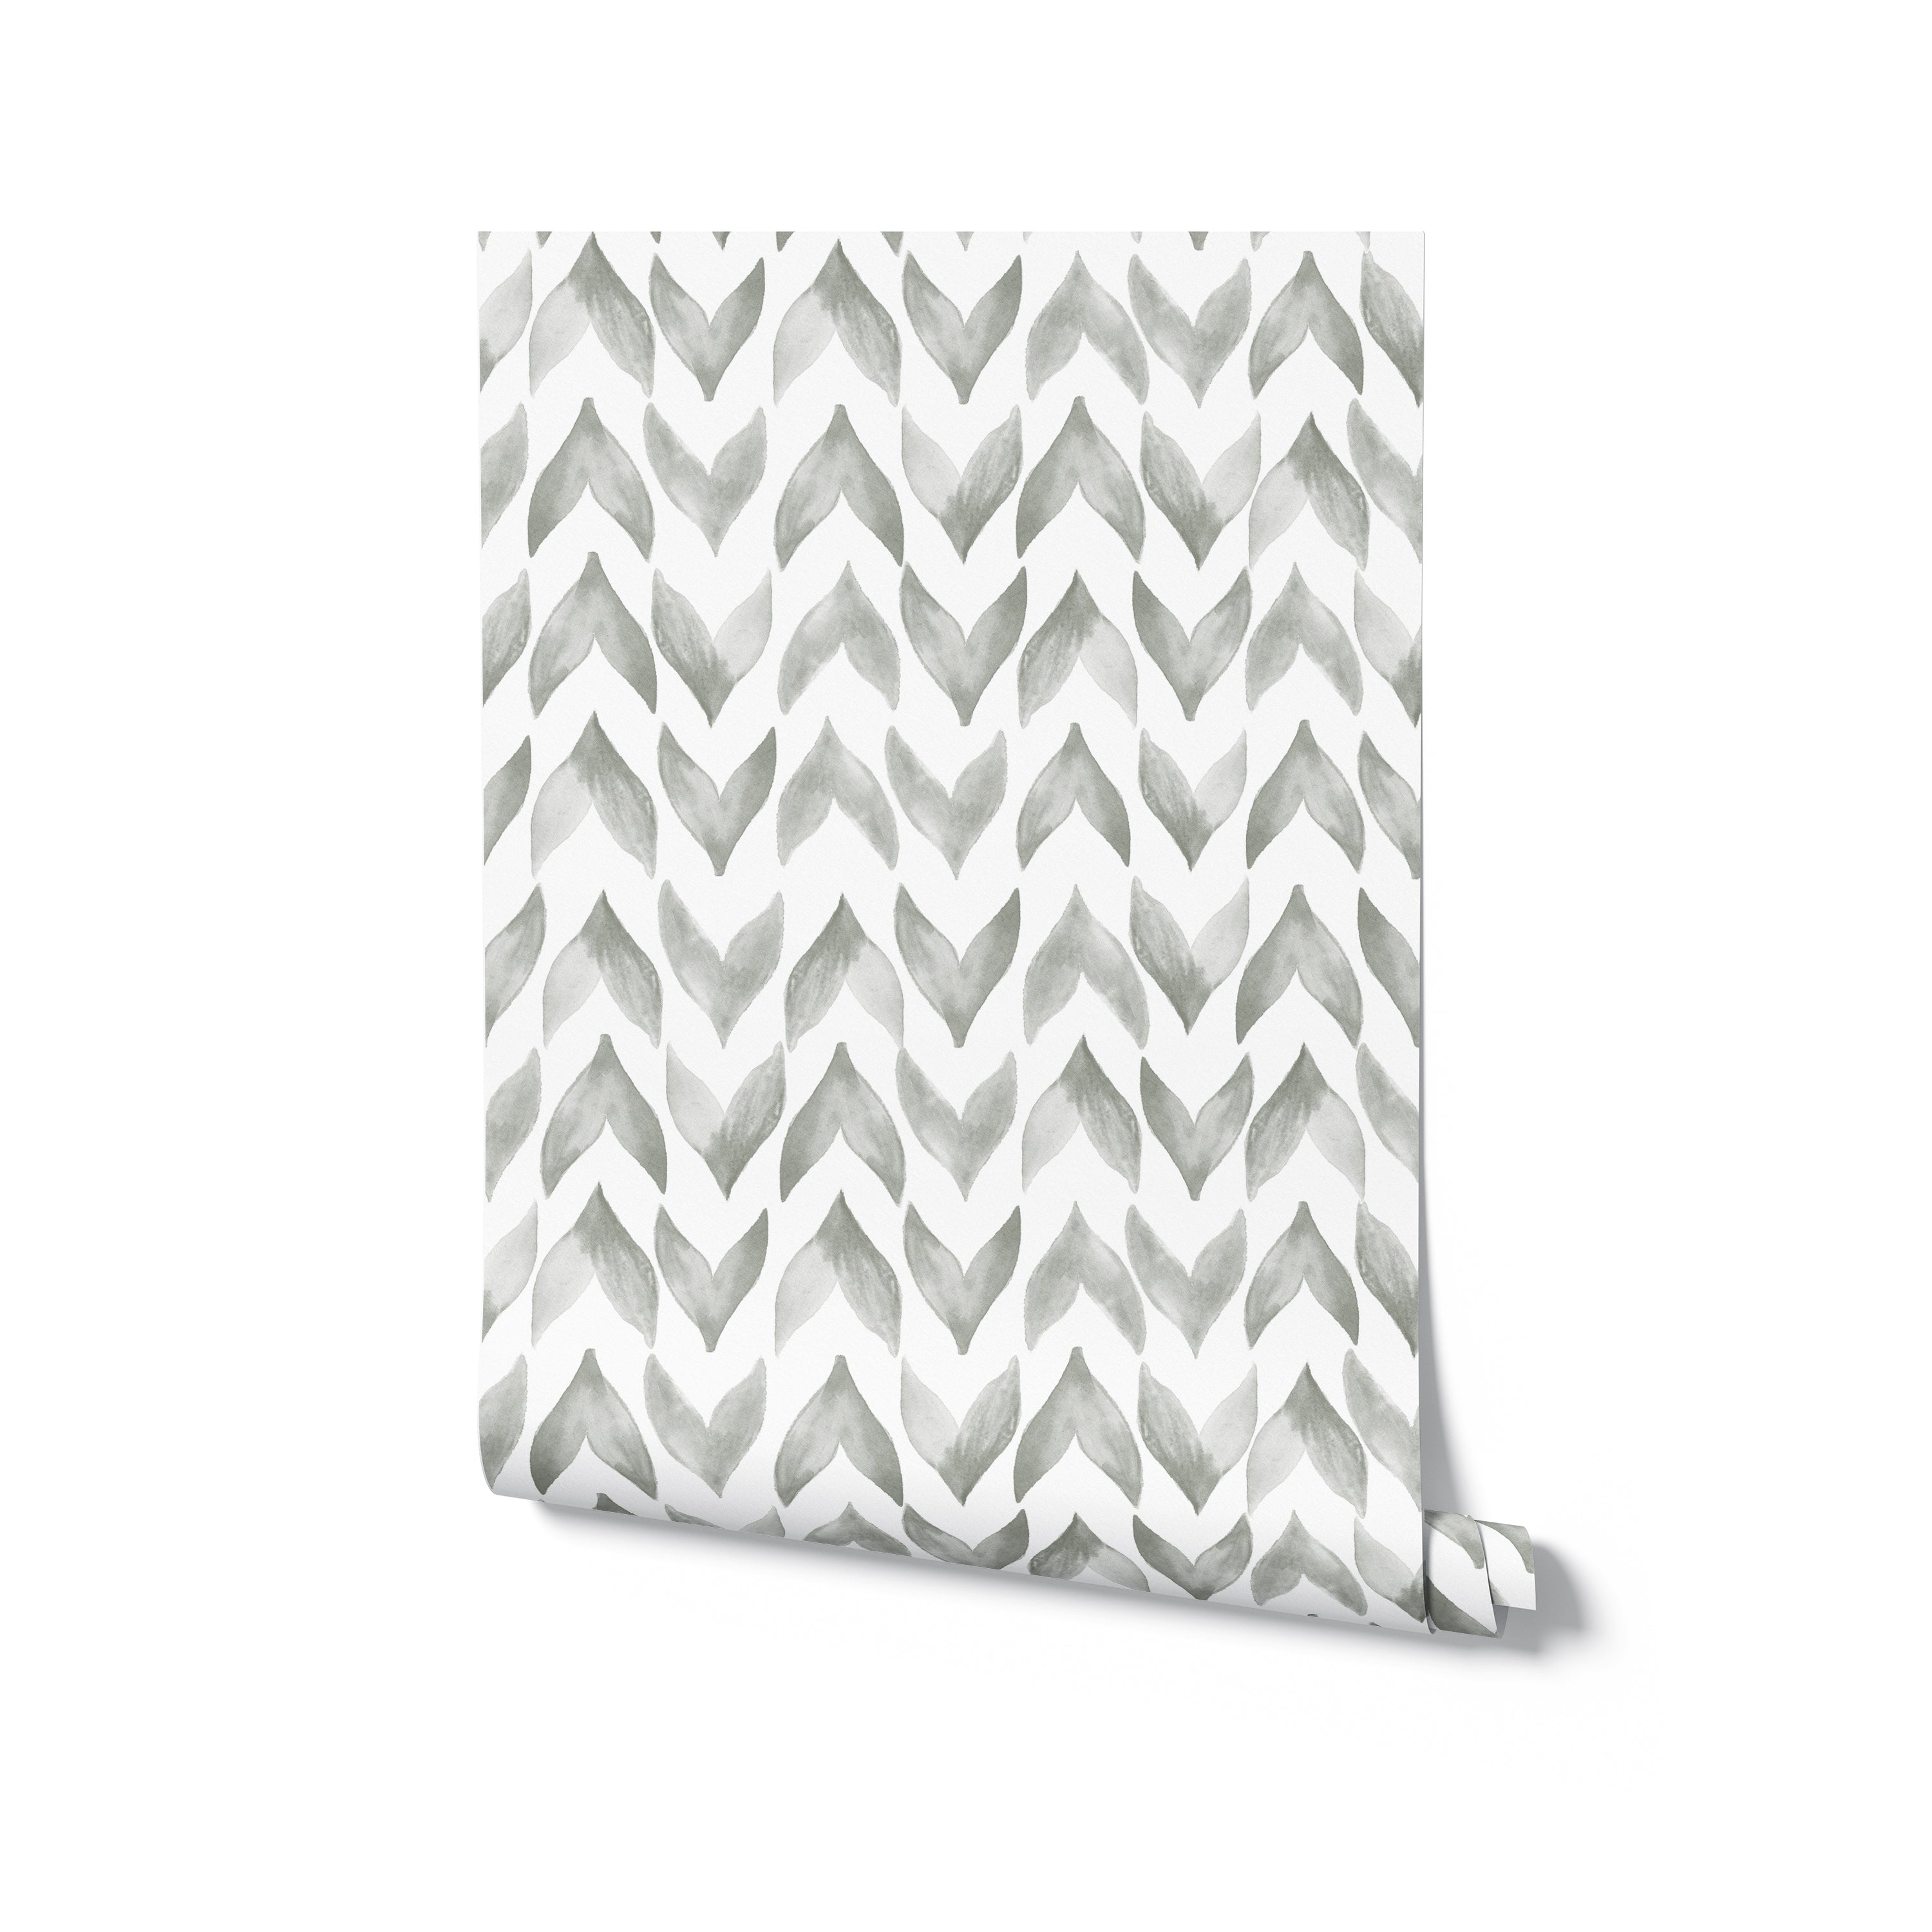 A rolled-up wallpaper sample revealing the Moroccan Tile pattern, which consists of white and gray watercolor zigzag shapes, giving a sophisticated and contemporary feel to the design.